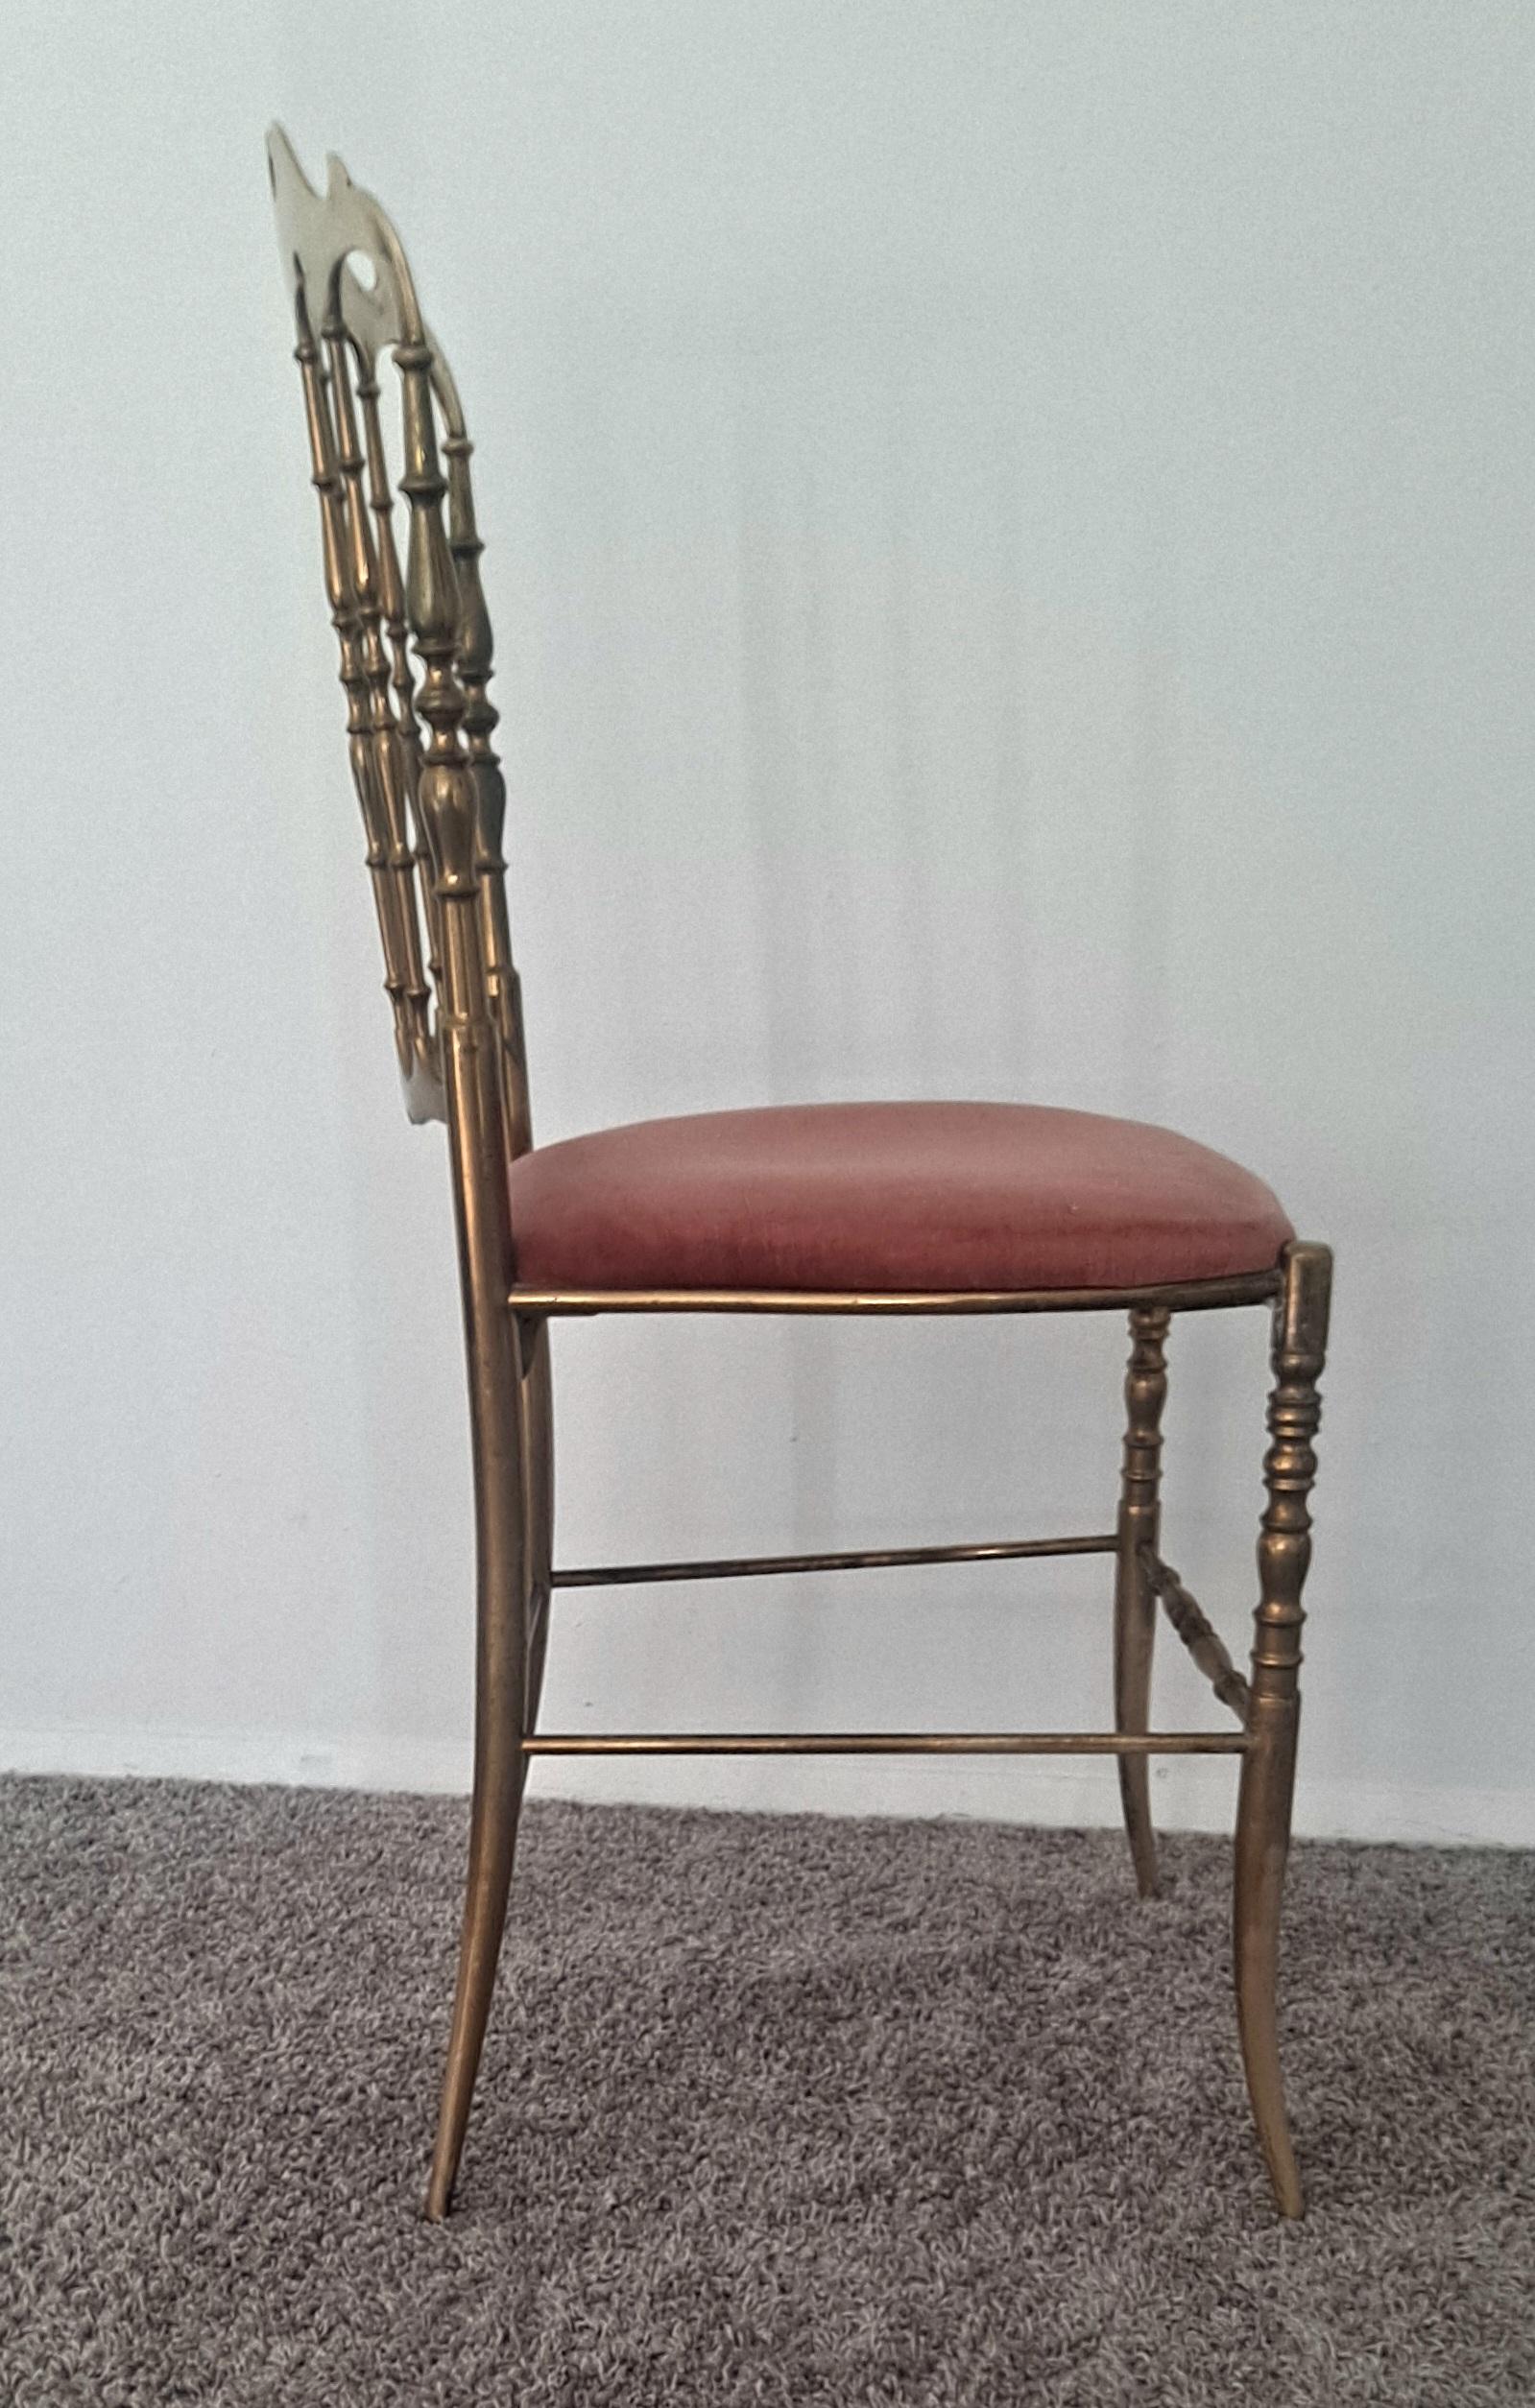 Italian brass chair in Neoclassical style from the 1950 s . Pink velvet upholstery .
 we have one more chair like this slightly different size .